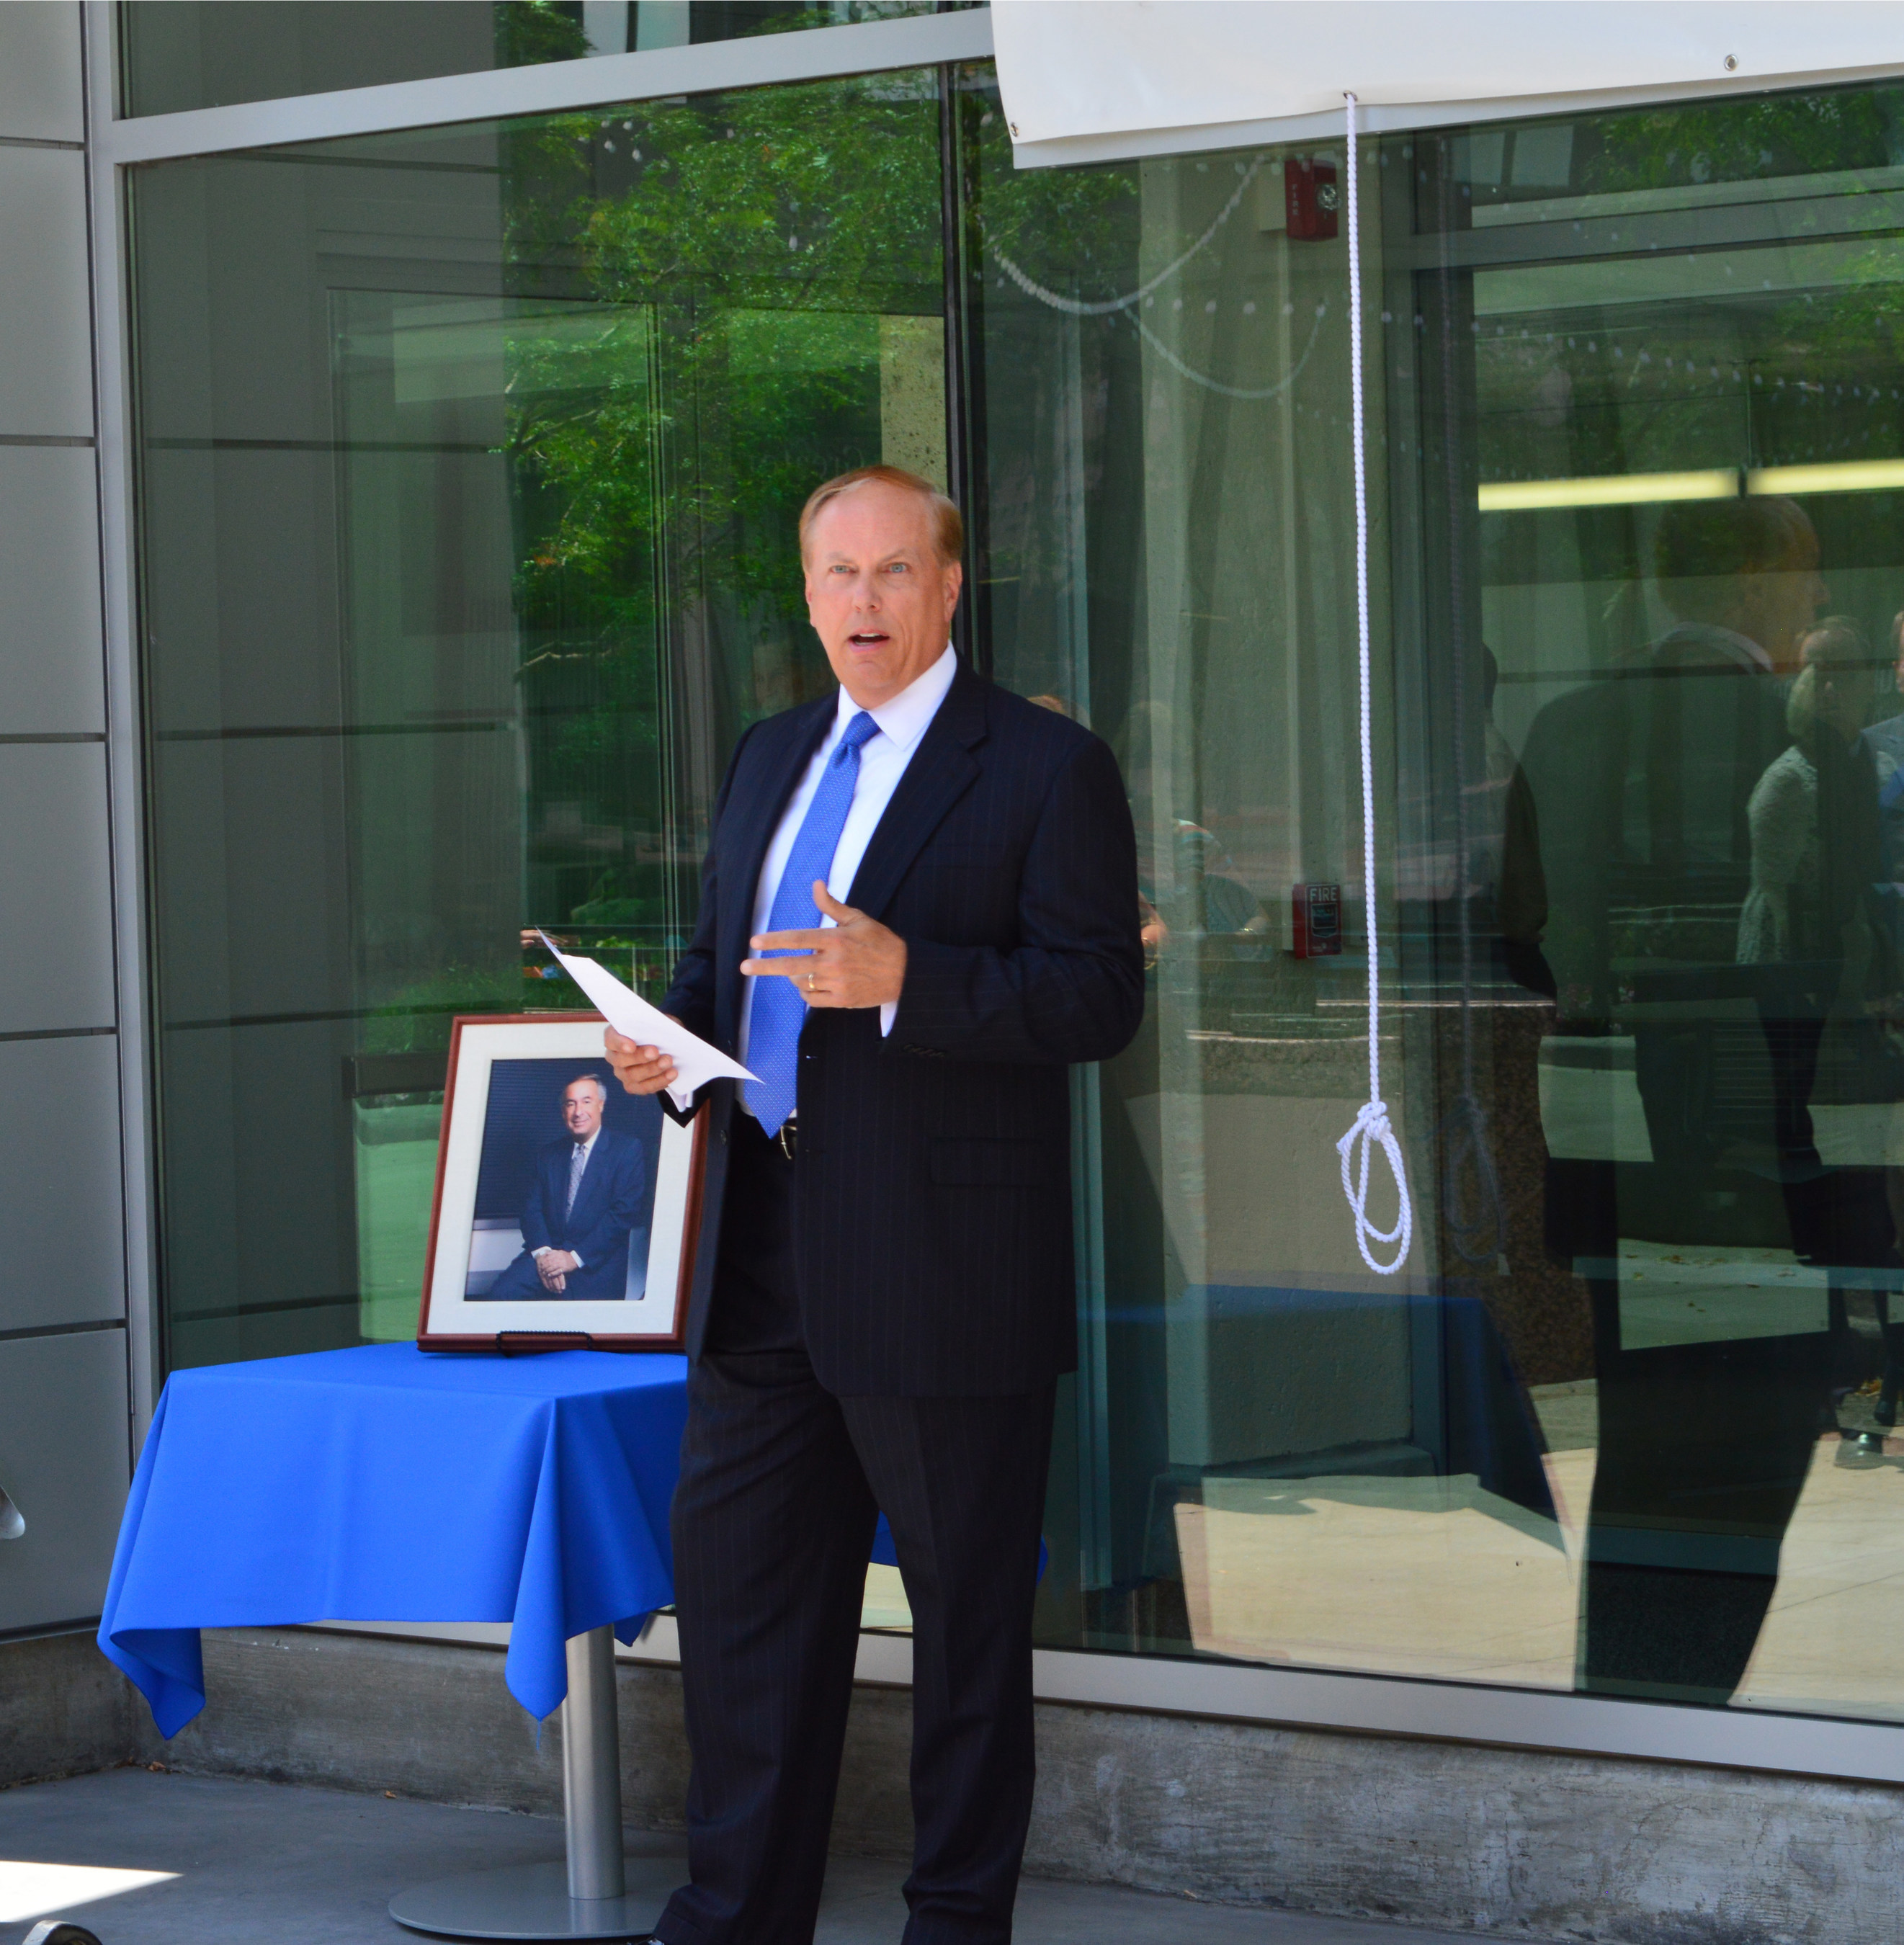 Paul Greig, FirstMerit chairman, president and CEO Dedicates Clifford J. Isroff Building in Downtown Akron